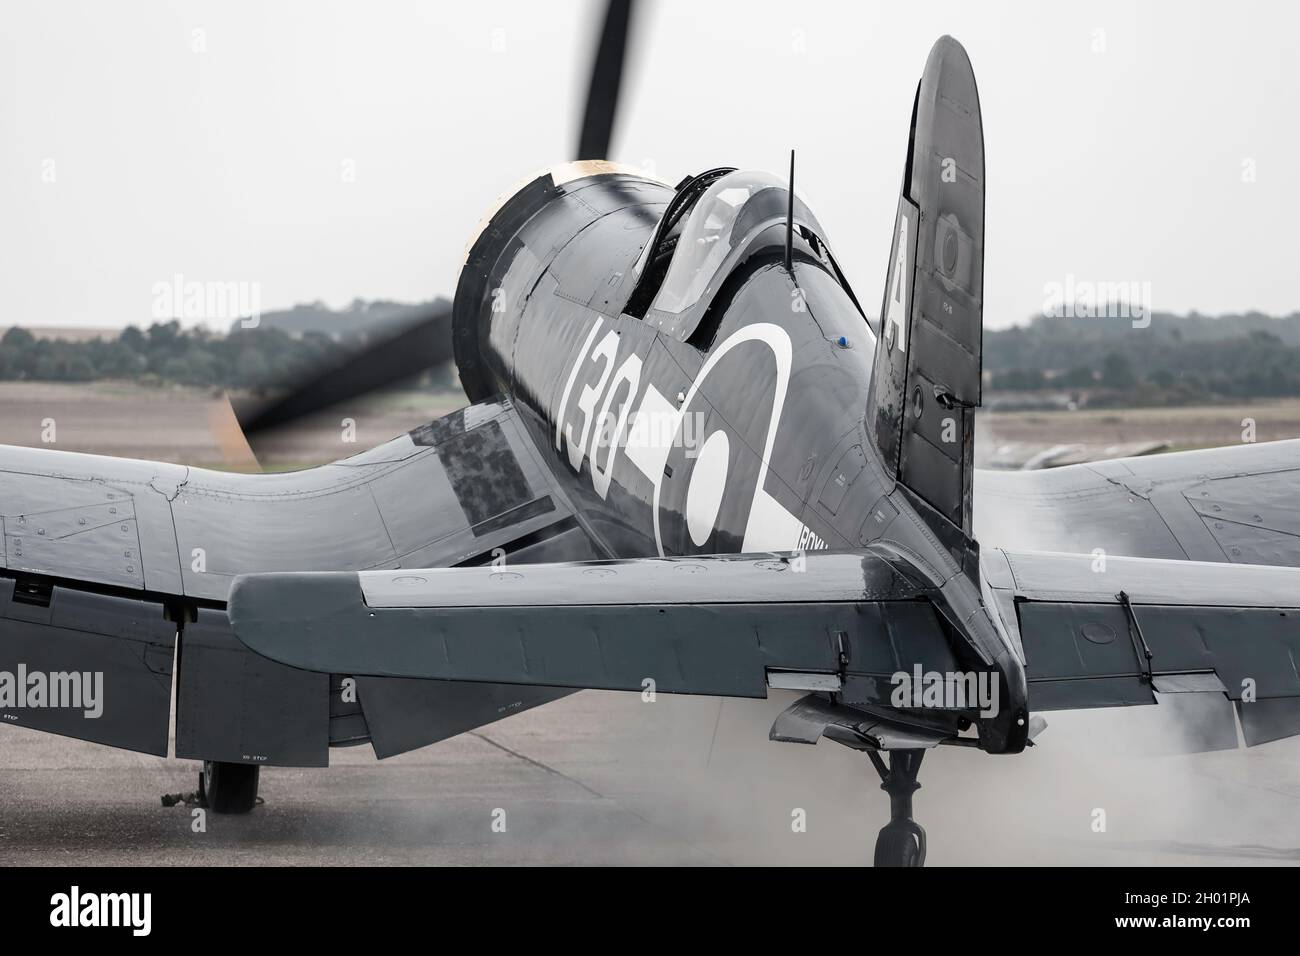 The Vought F4U Corsair is an American fighter aircraft which saw service primarily in World War II and the Korean War. Designed and initially manufact Stock Photo